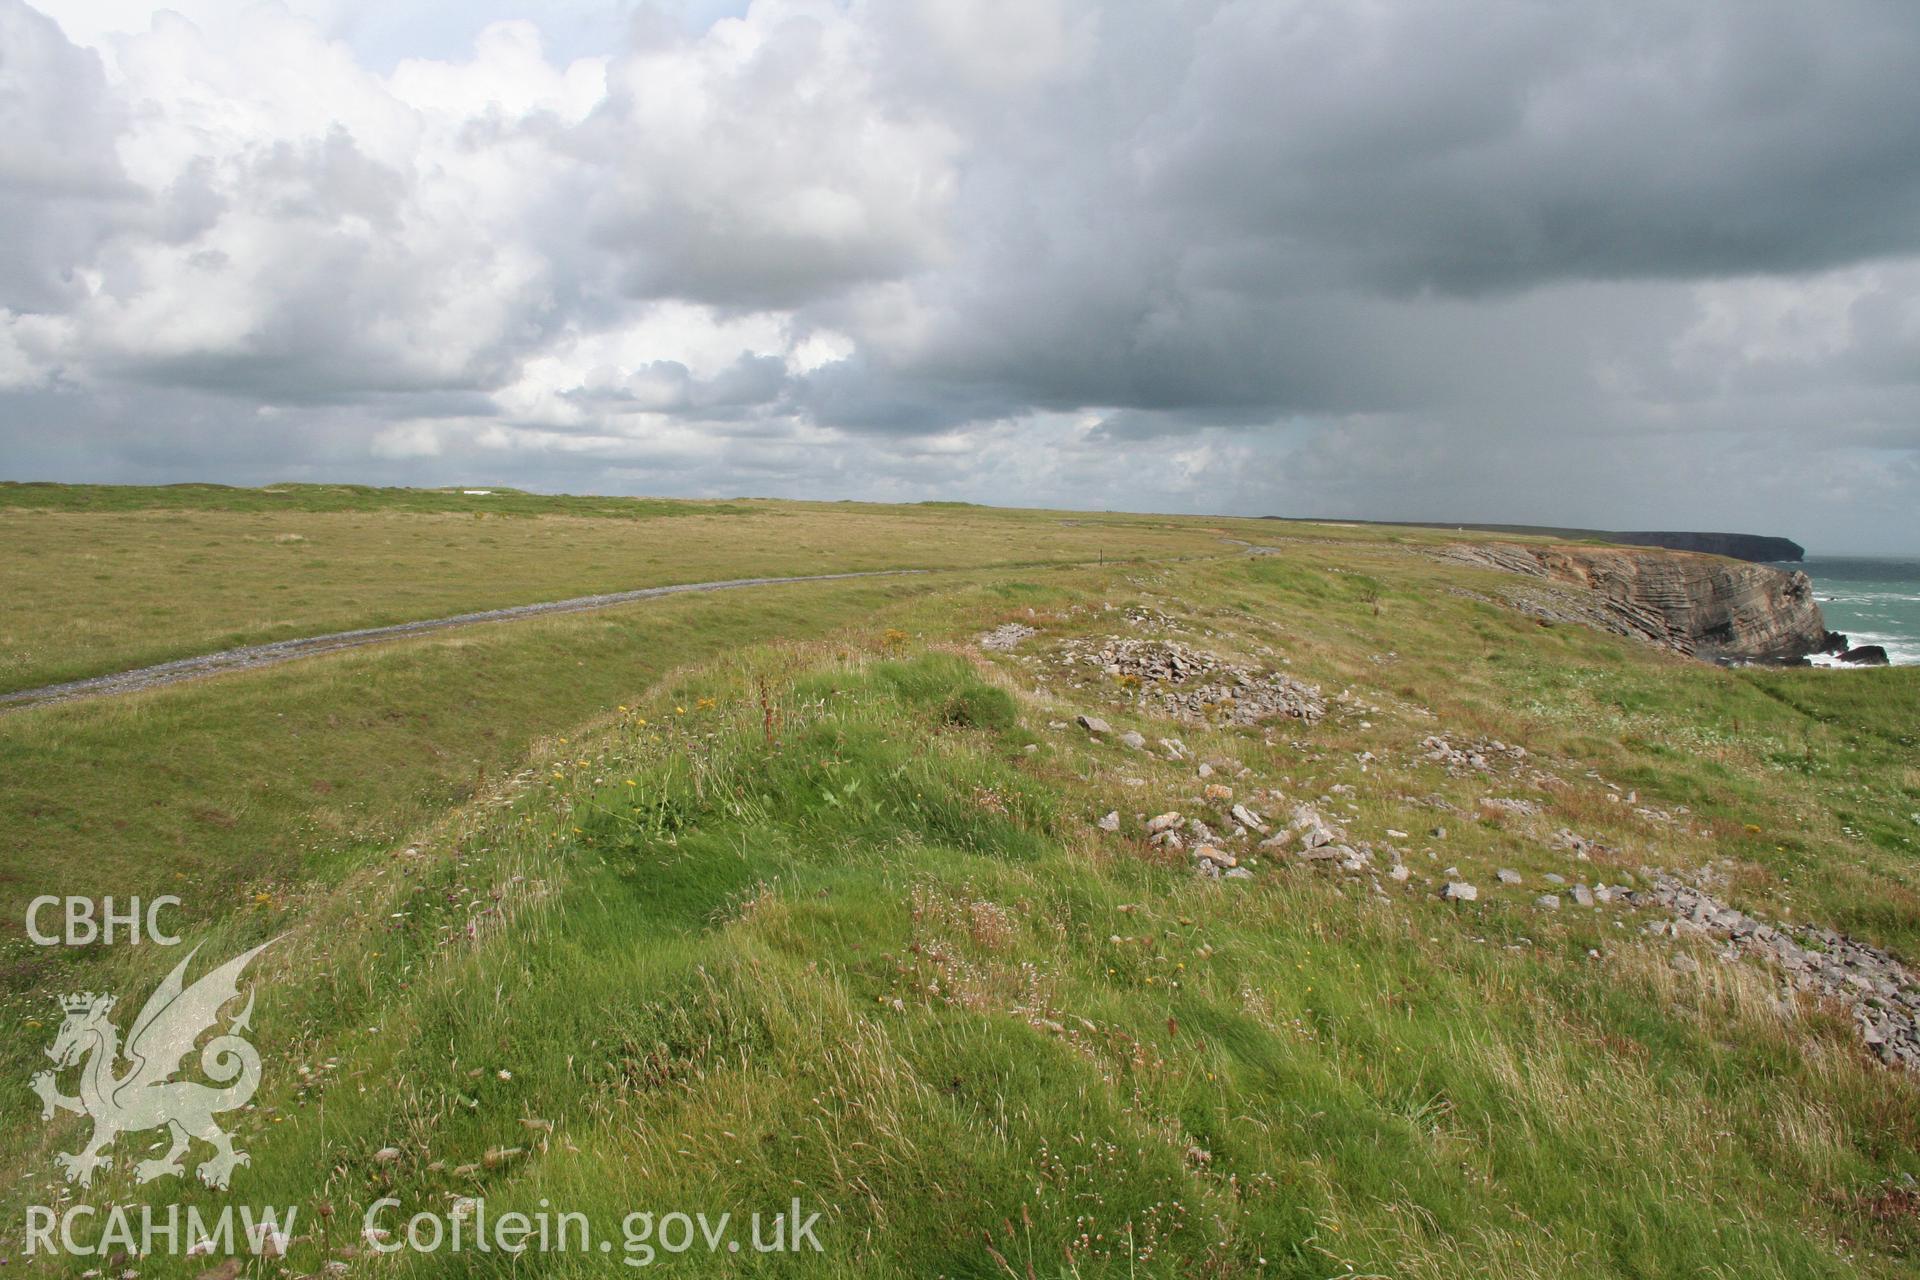 Looking east along the inner face of the rampart bank to the east of the fort entrance.